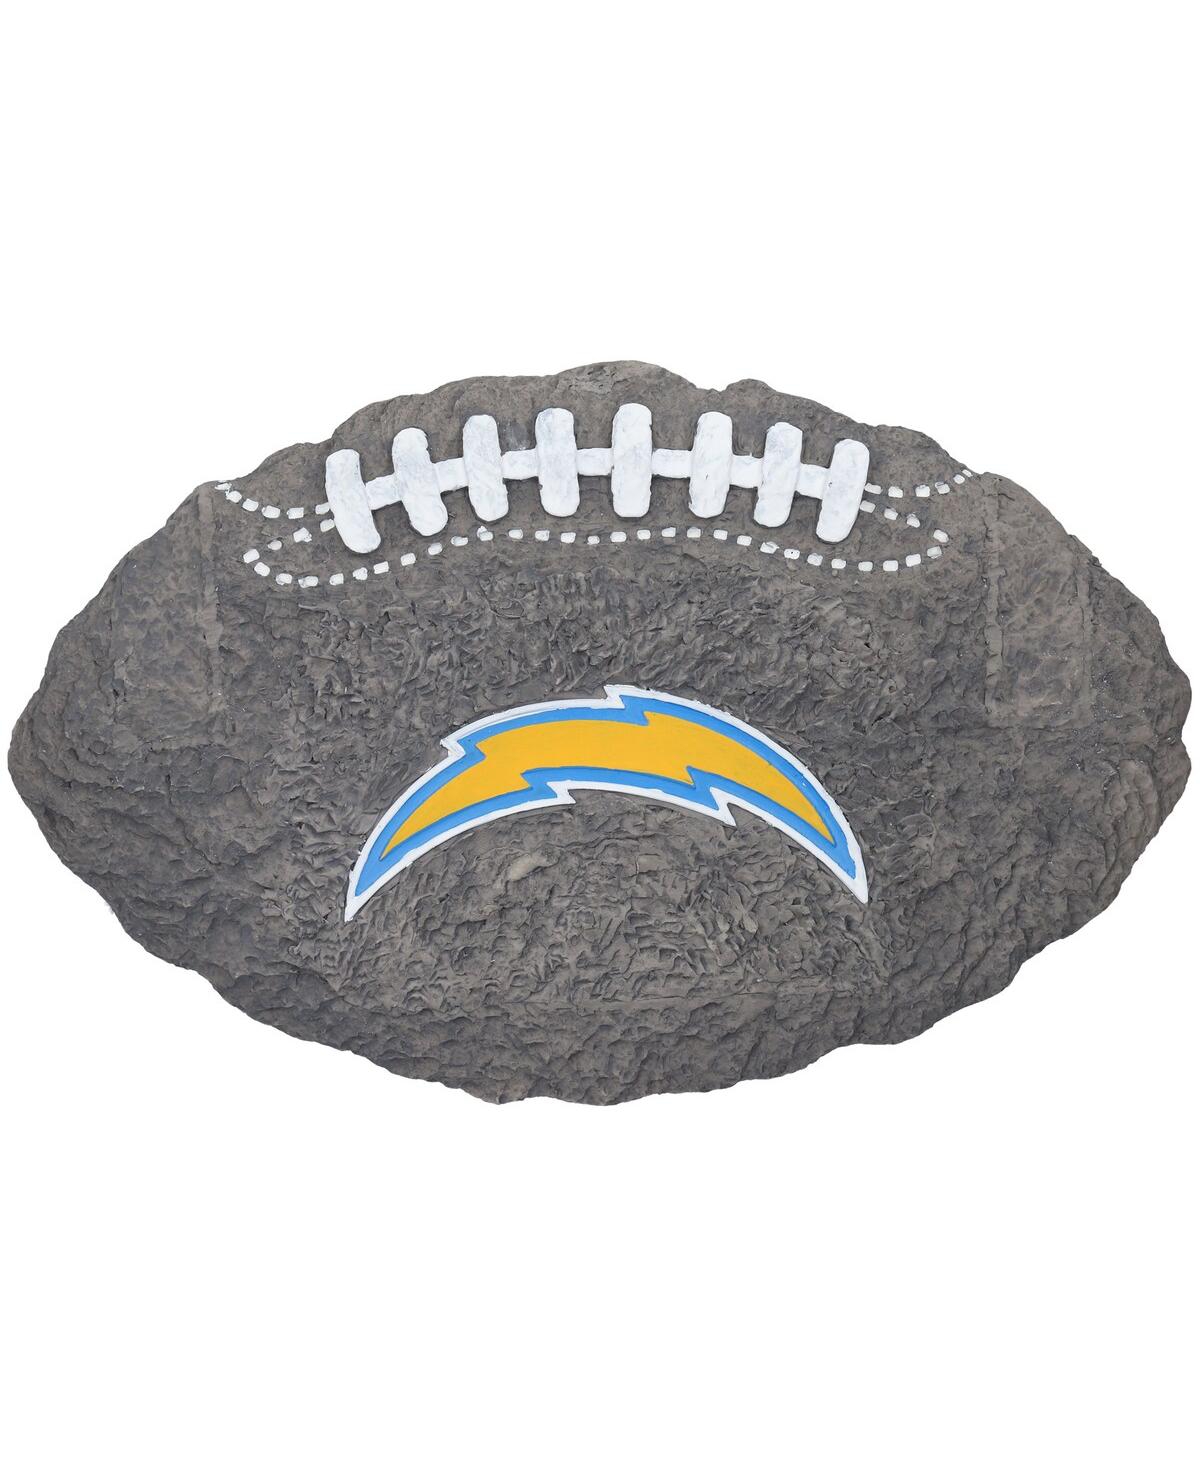 Los Angeles Chargers Ball Garden Stone - Gray